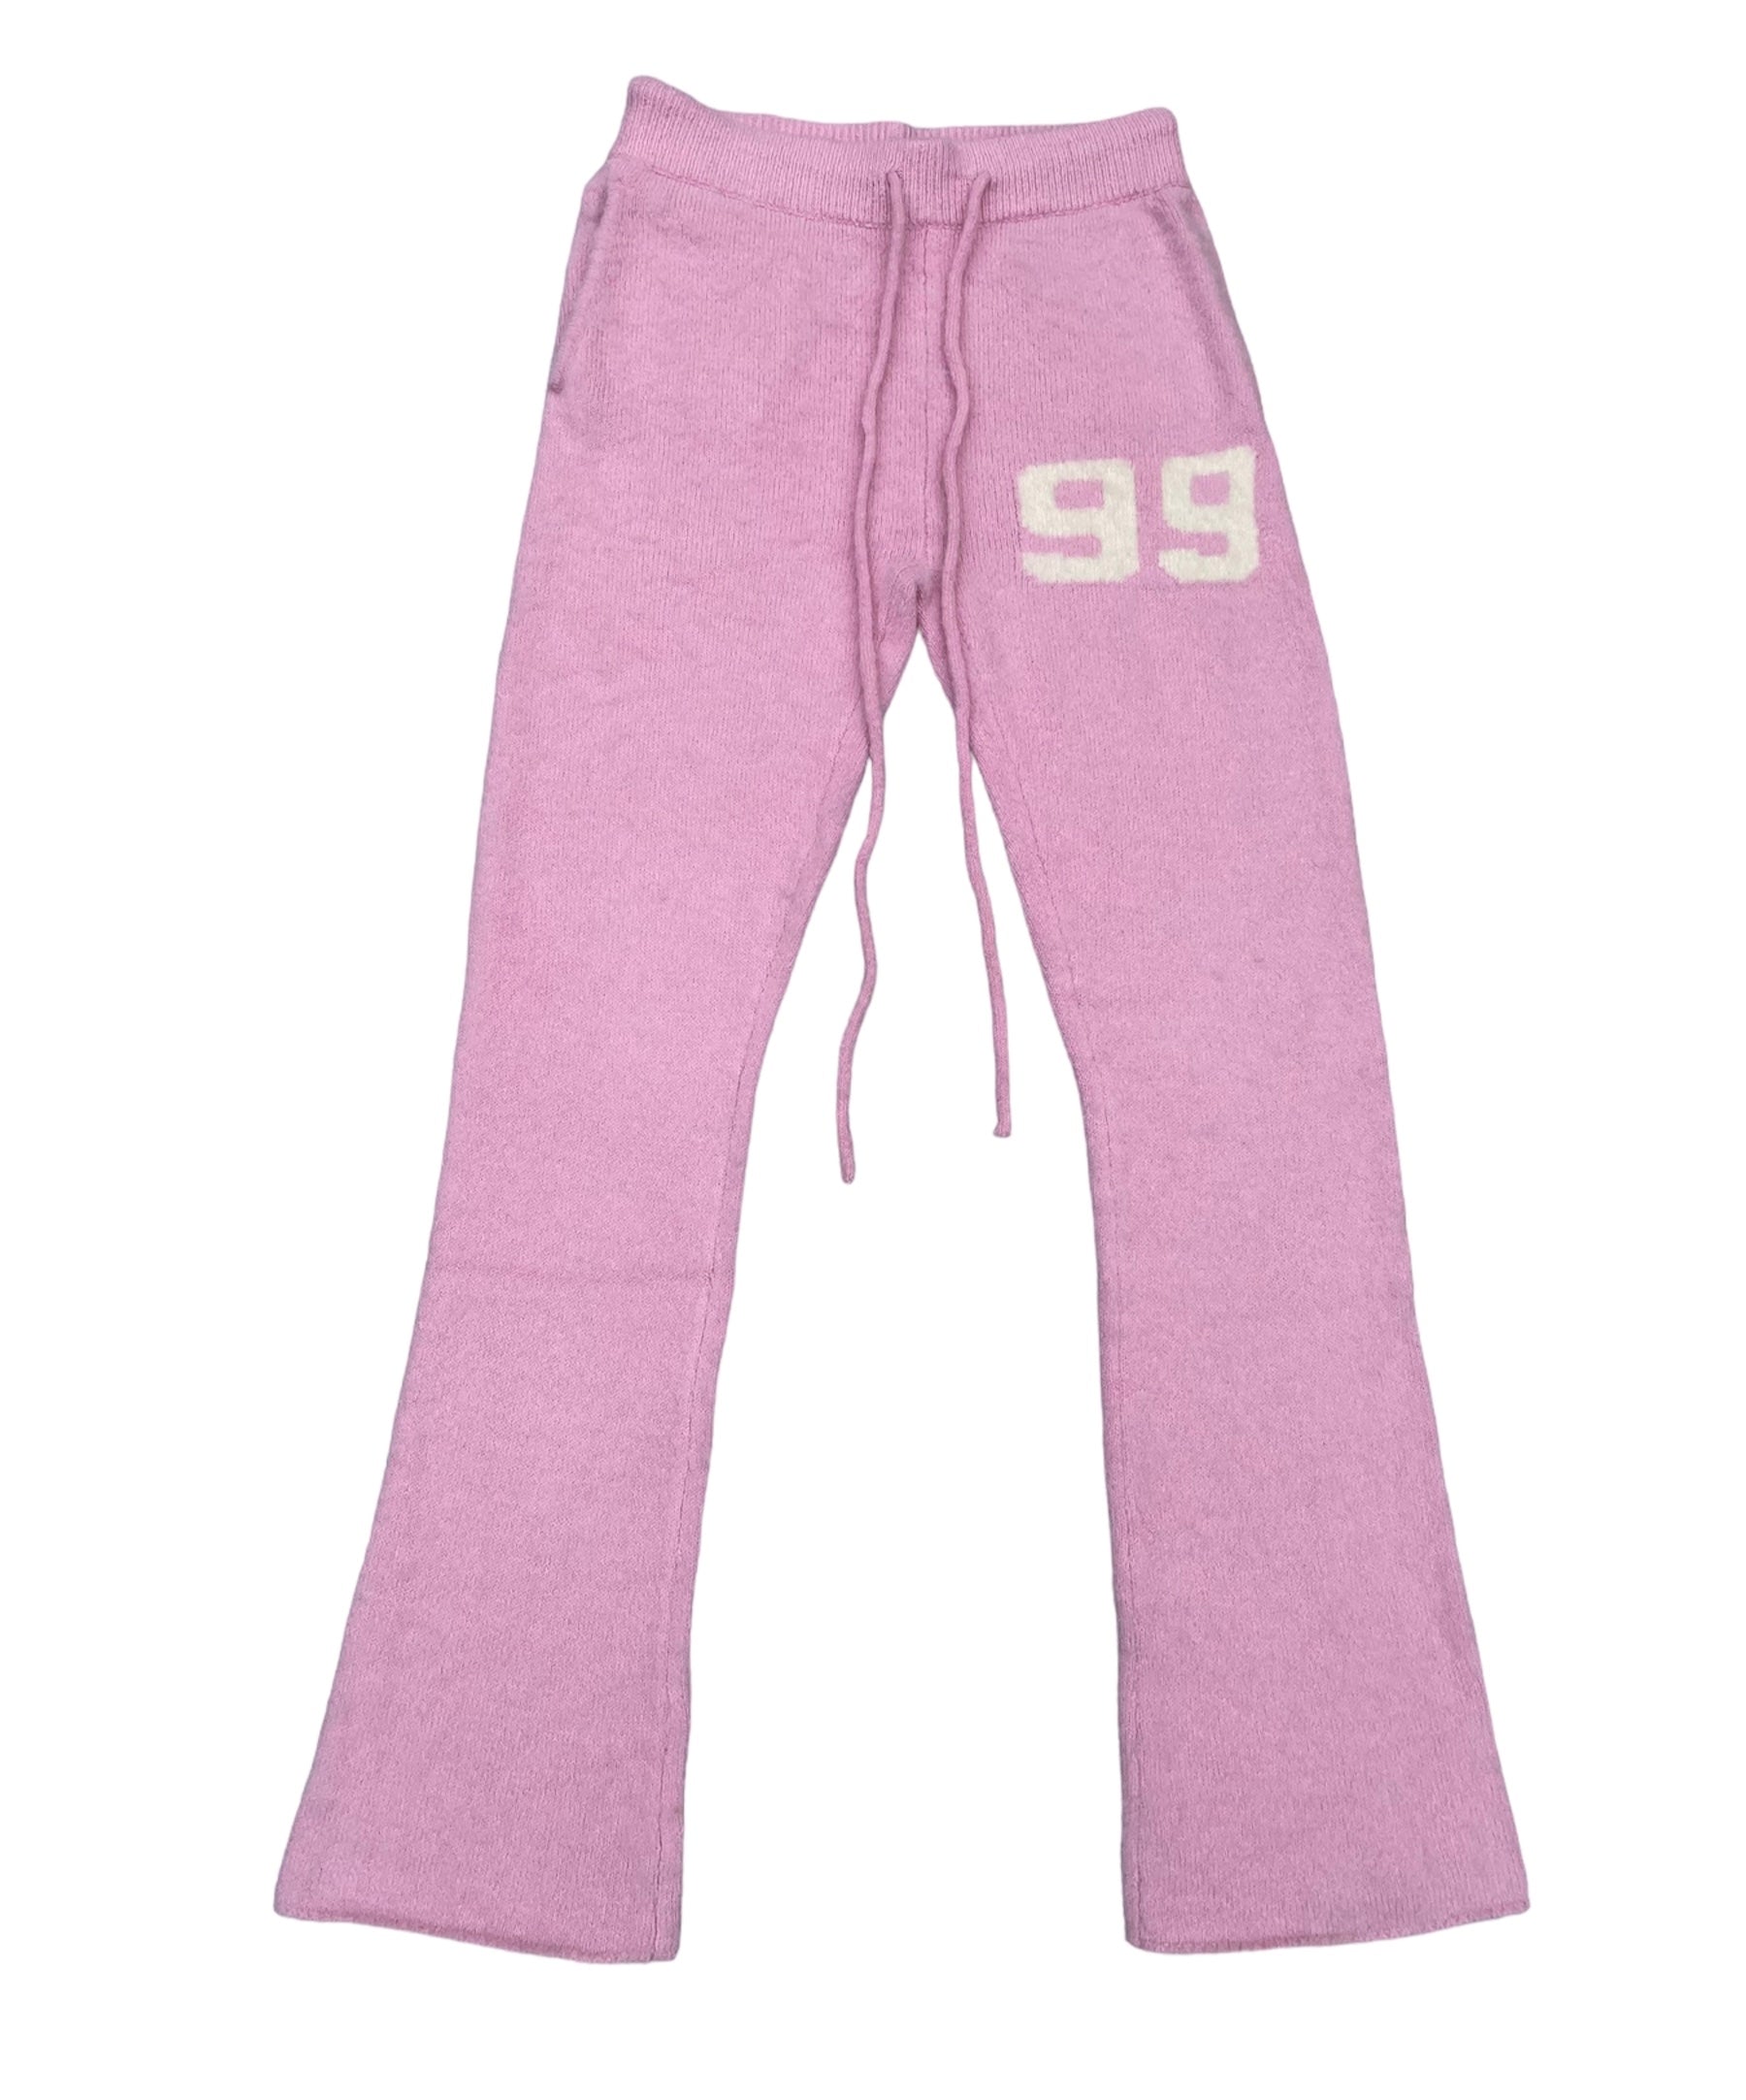 PINK Flared Athletic Pants for Women